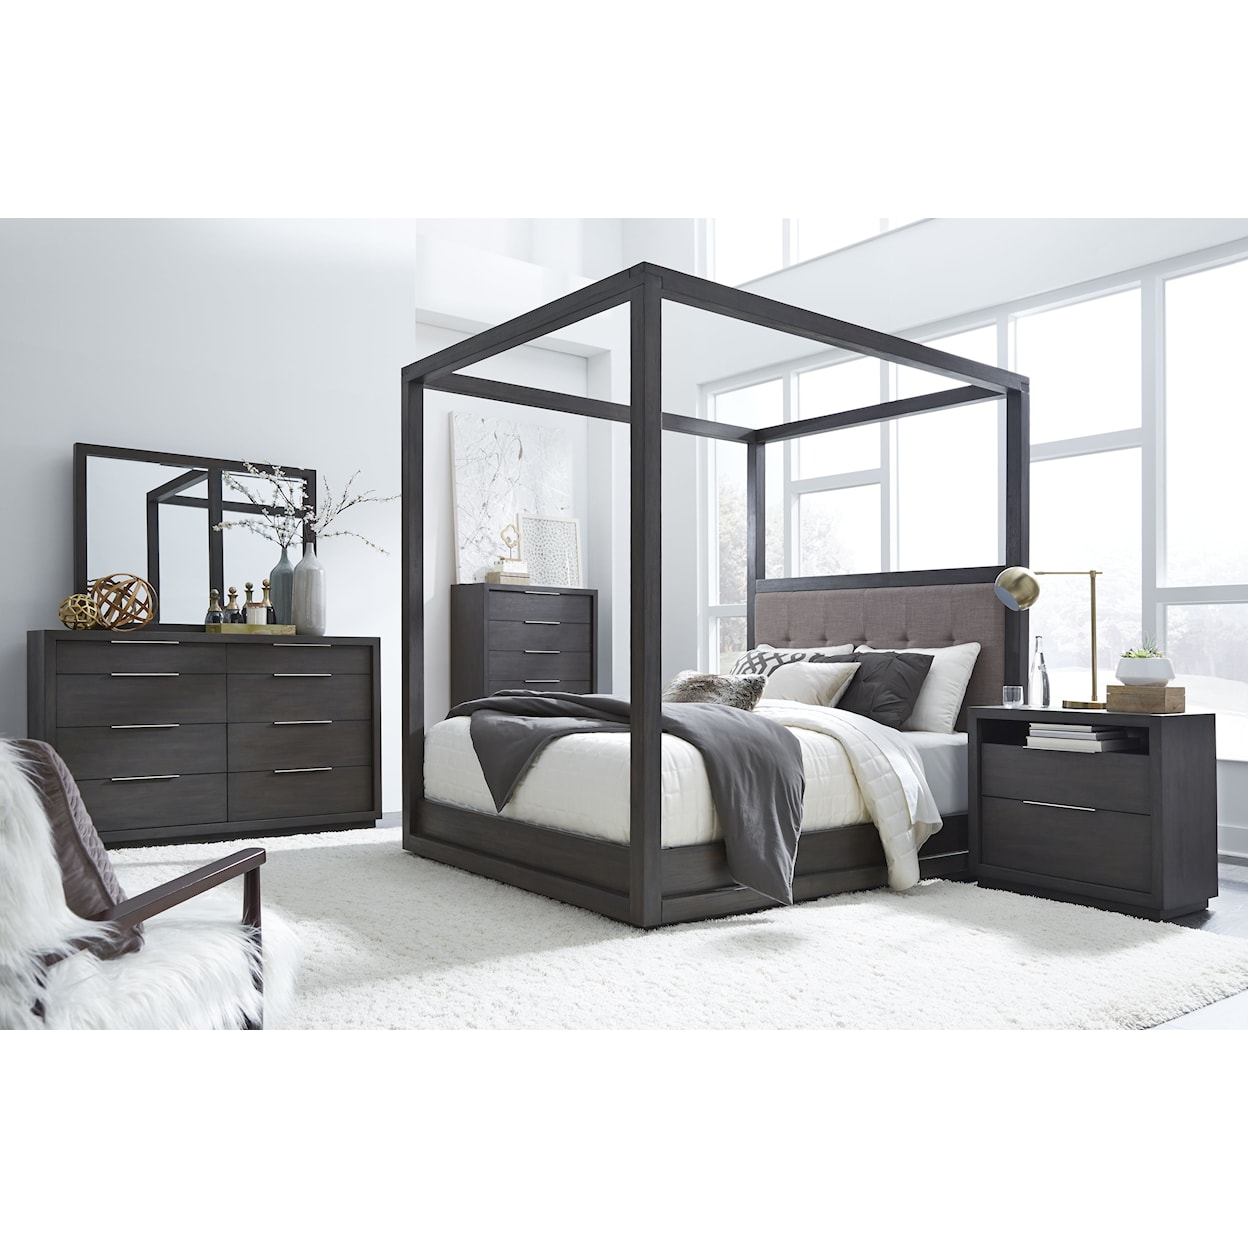 Modus International Oxford Full Canopy Bed